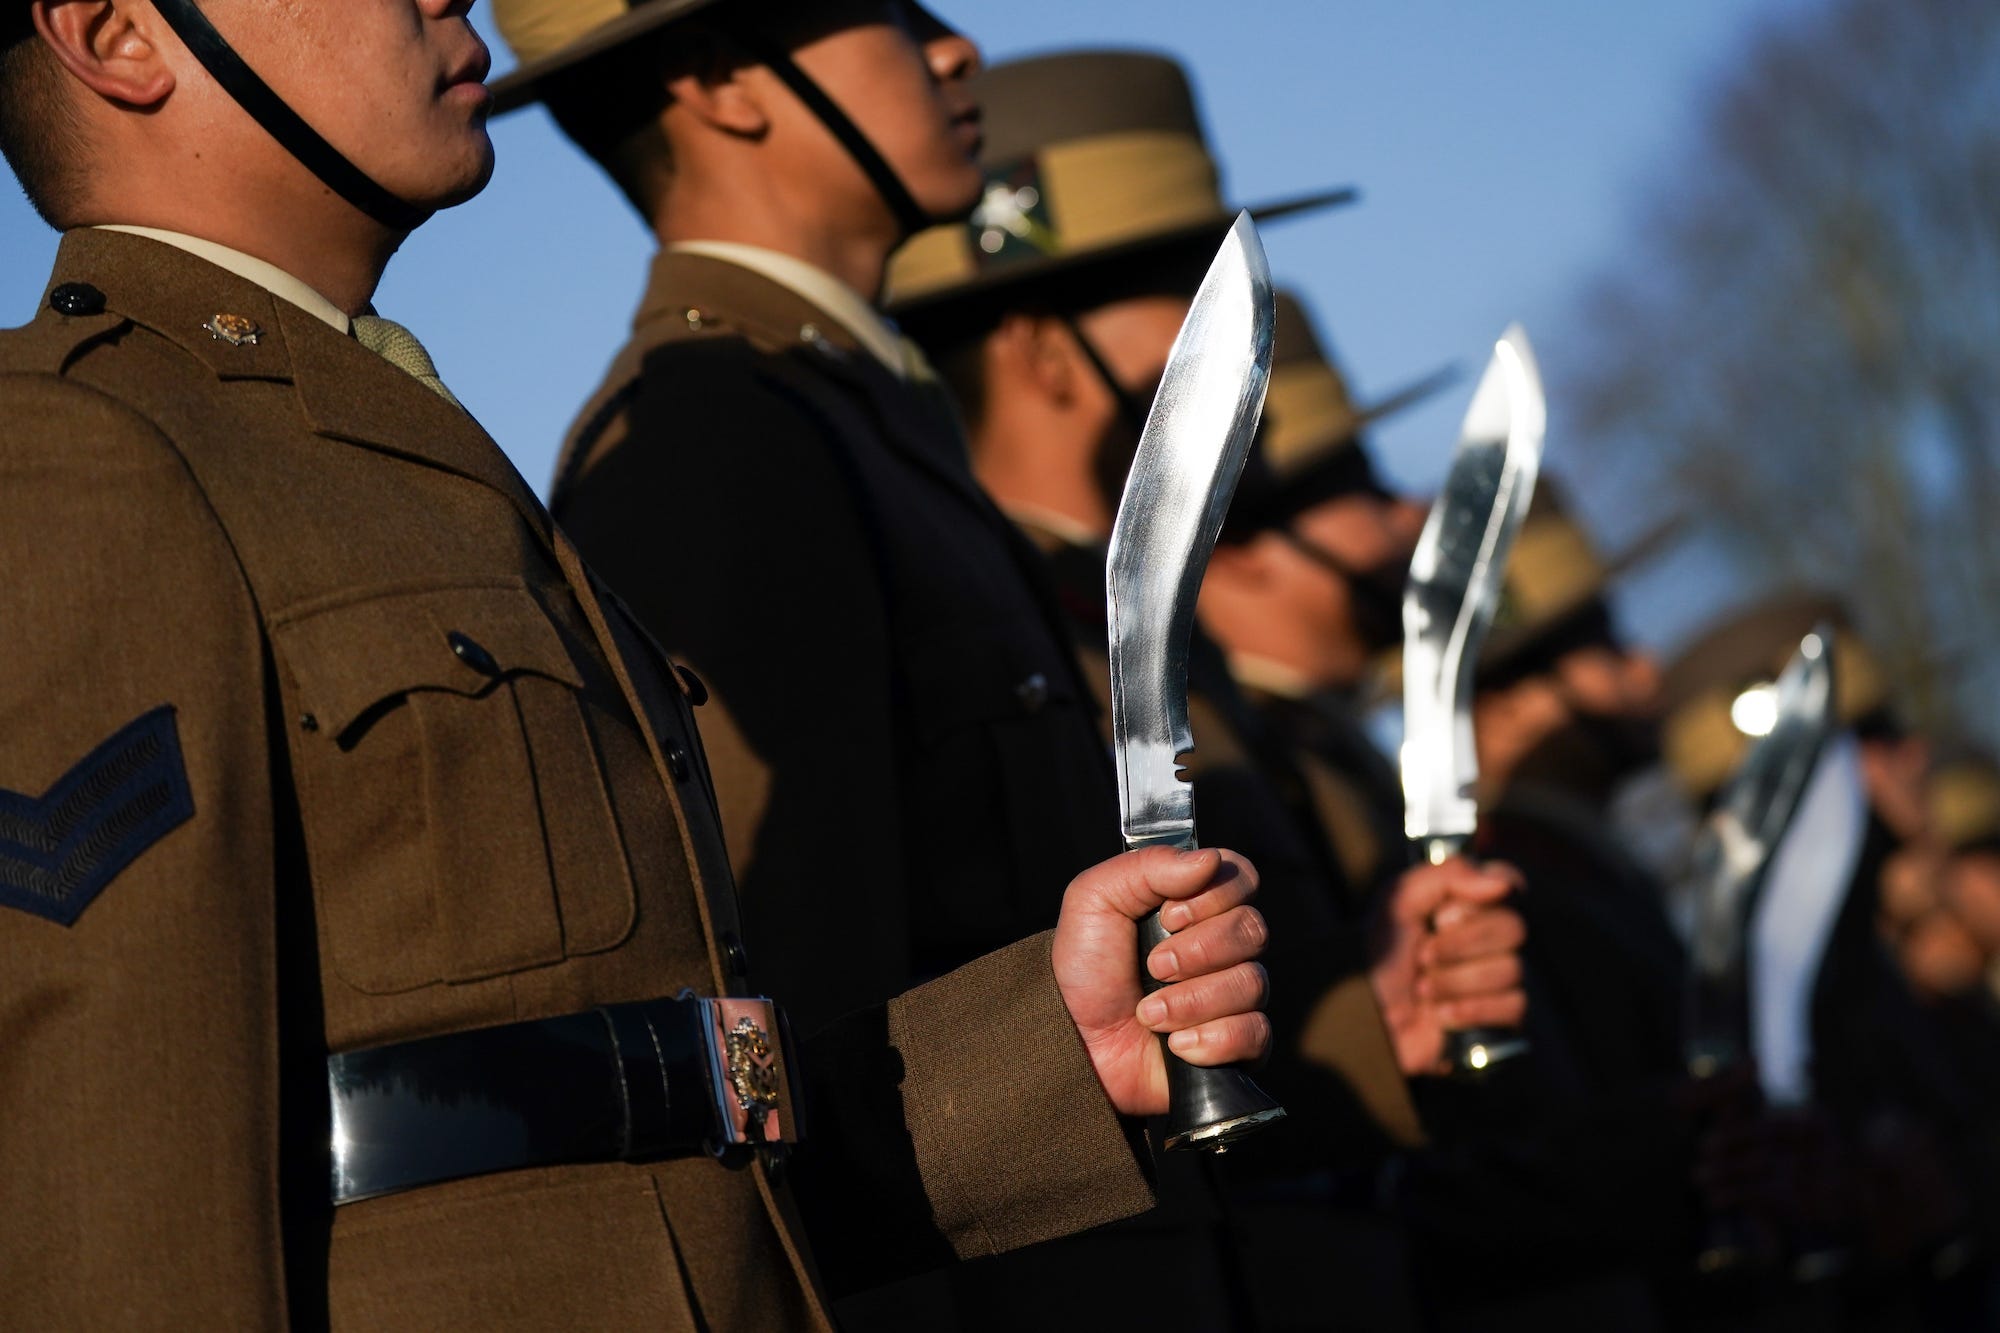 Gurkha soldiers with knives